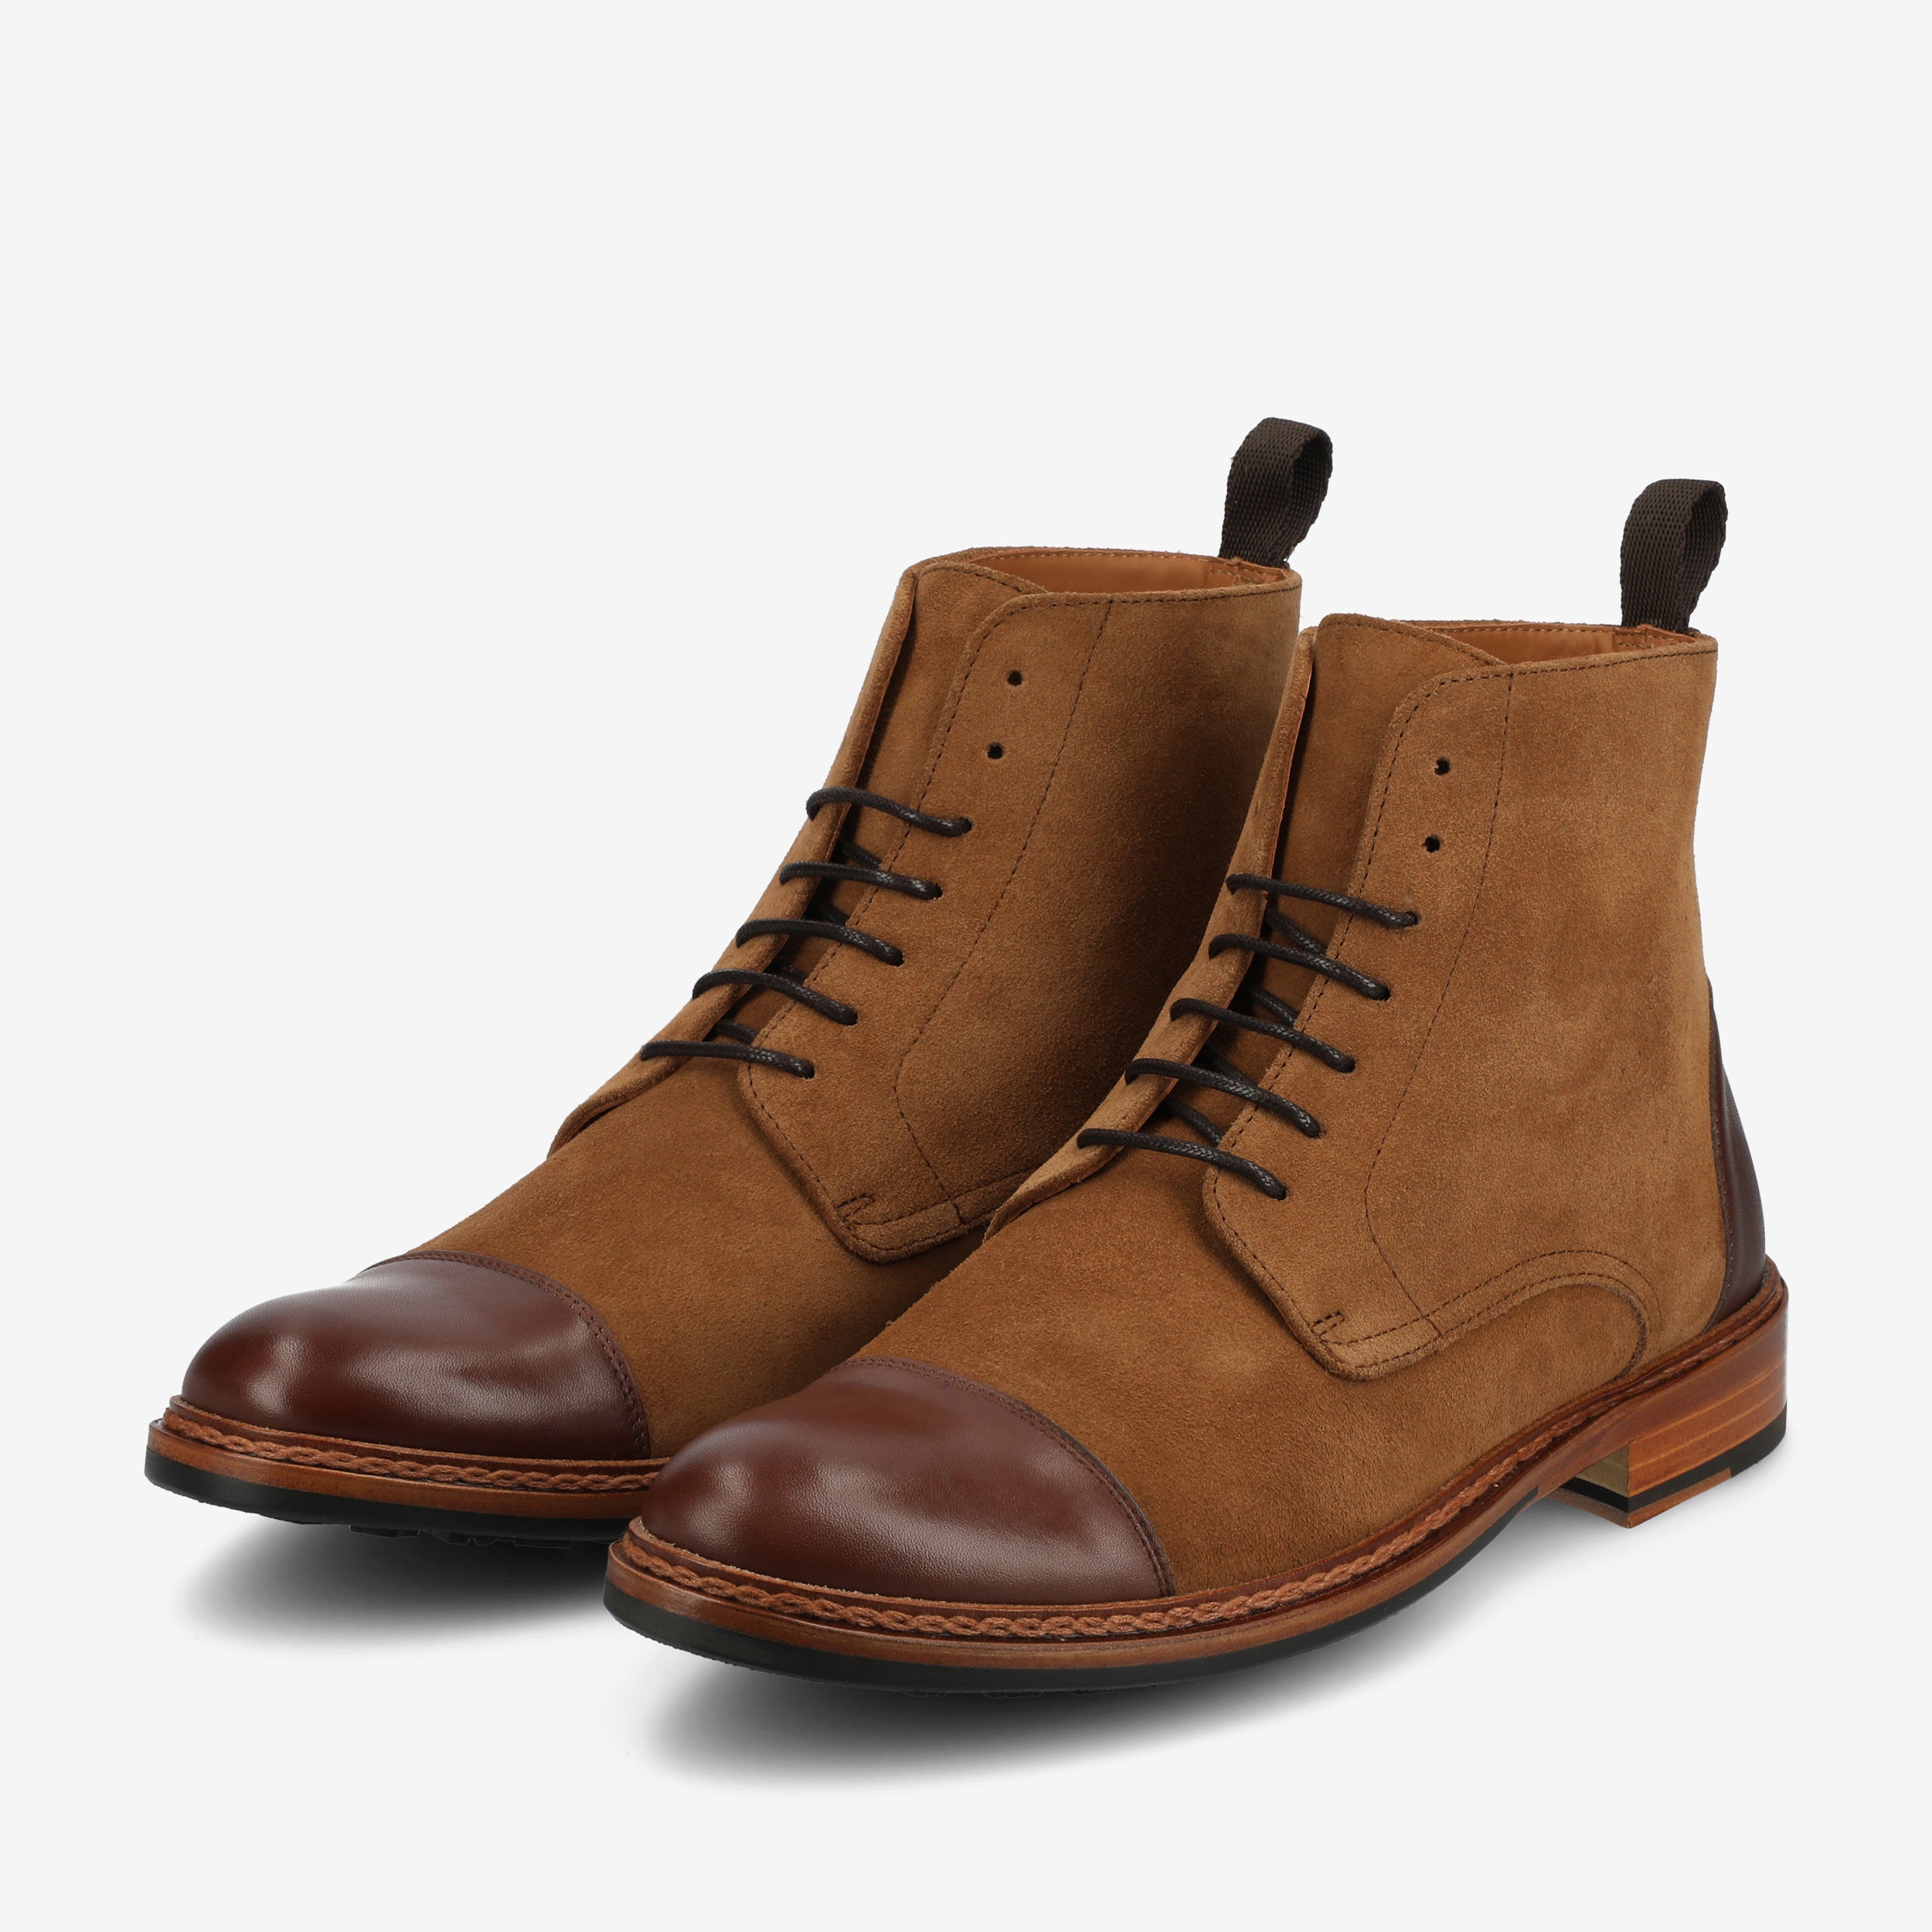 The Troy Boot in Cognac